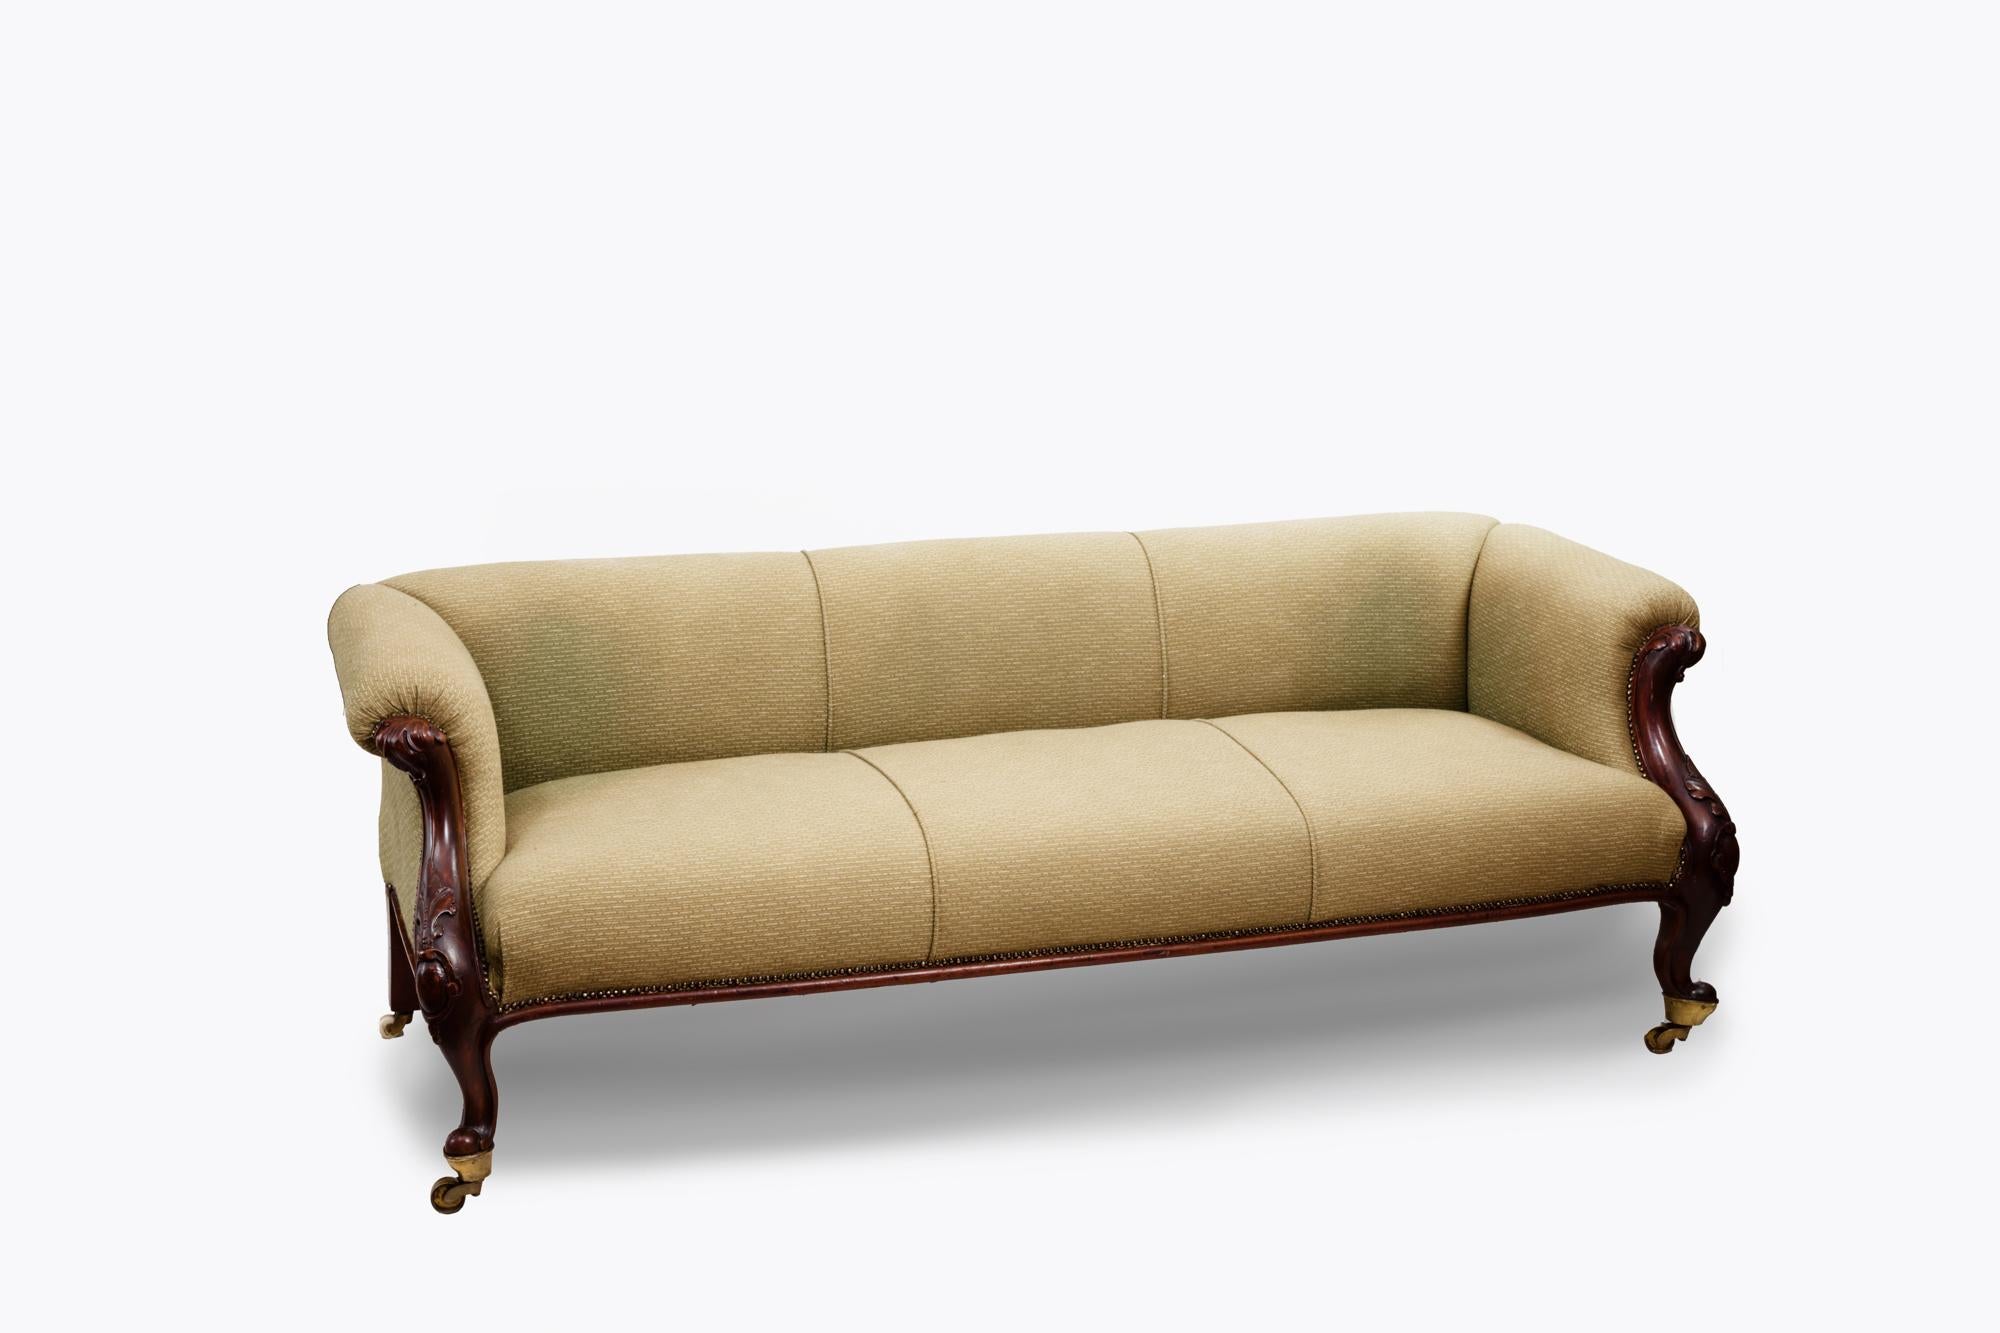 19th Century low back sofa with carved arms, over long seat raised on cabriole legs with acanthus leaf detailing terminating on original brass castors.